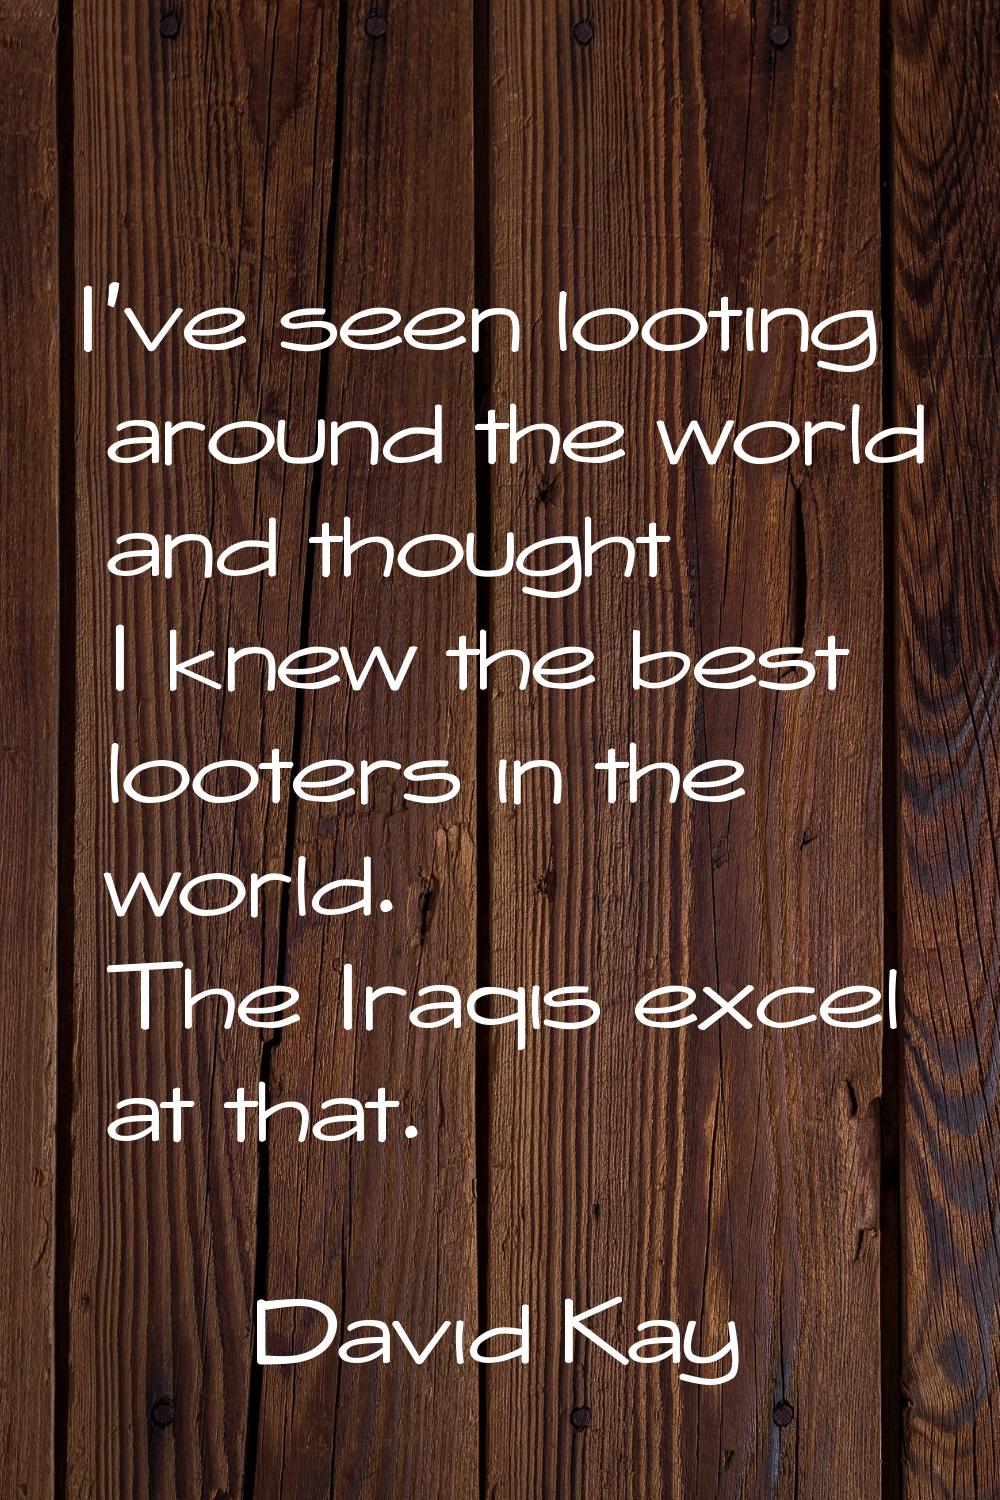 I've seen looting around the world and thought I knew the best looters in the world. The Iraqis exc